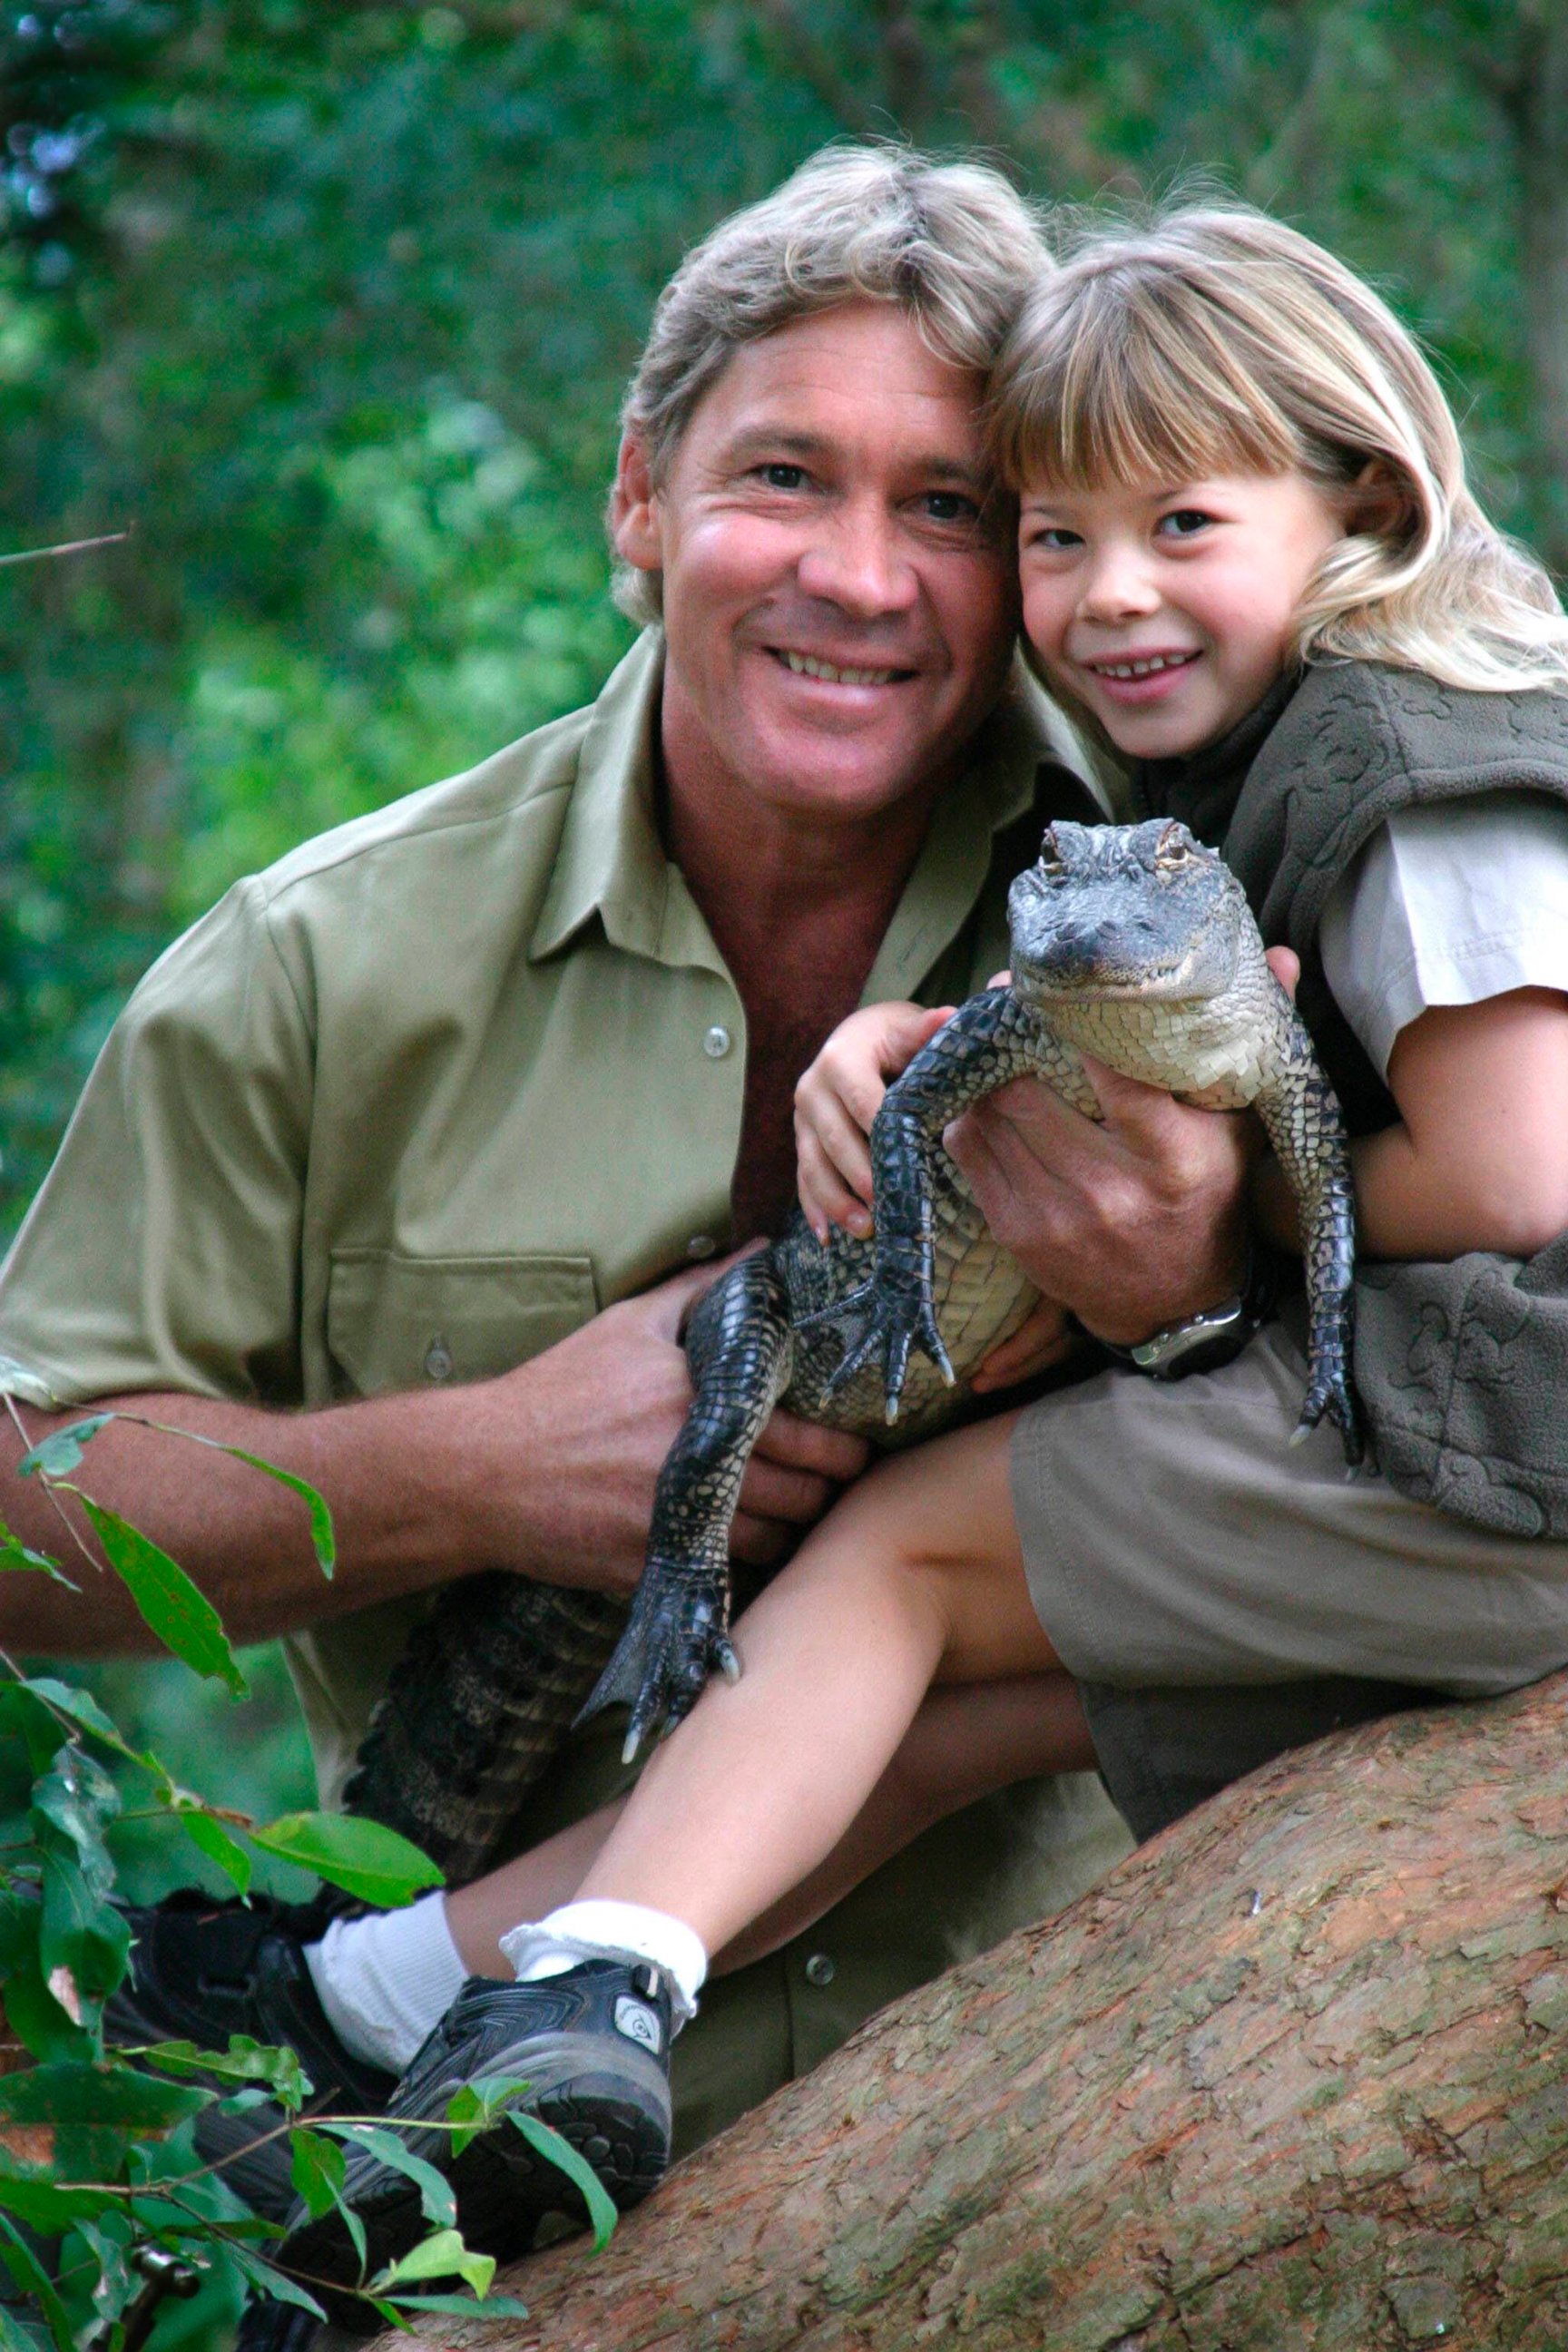 PHOTO: Steve Irwin is seen with his daughter, Bindi Irwin, and a 3-year-old alligator called 'Russ' at Australia Zoo in this June 25, 2005 file photo.